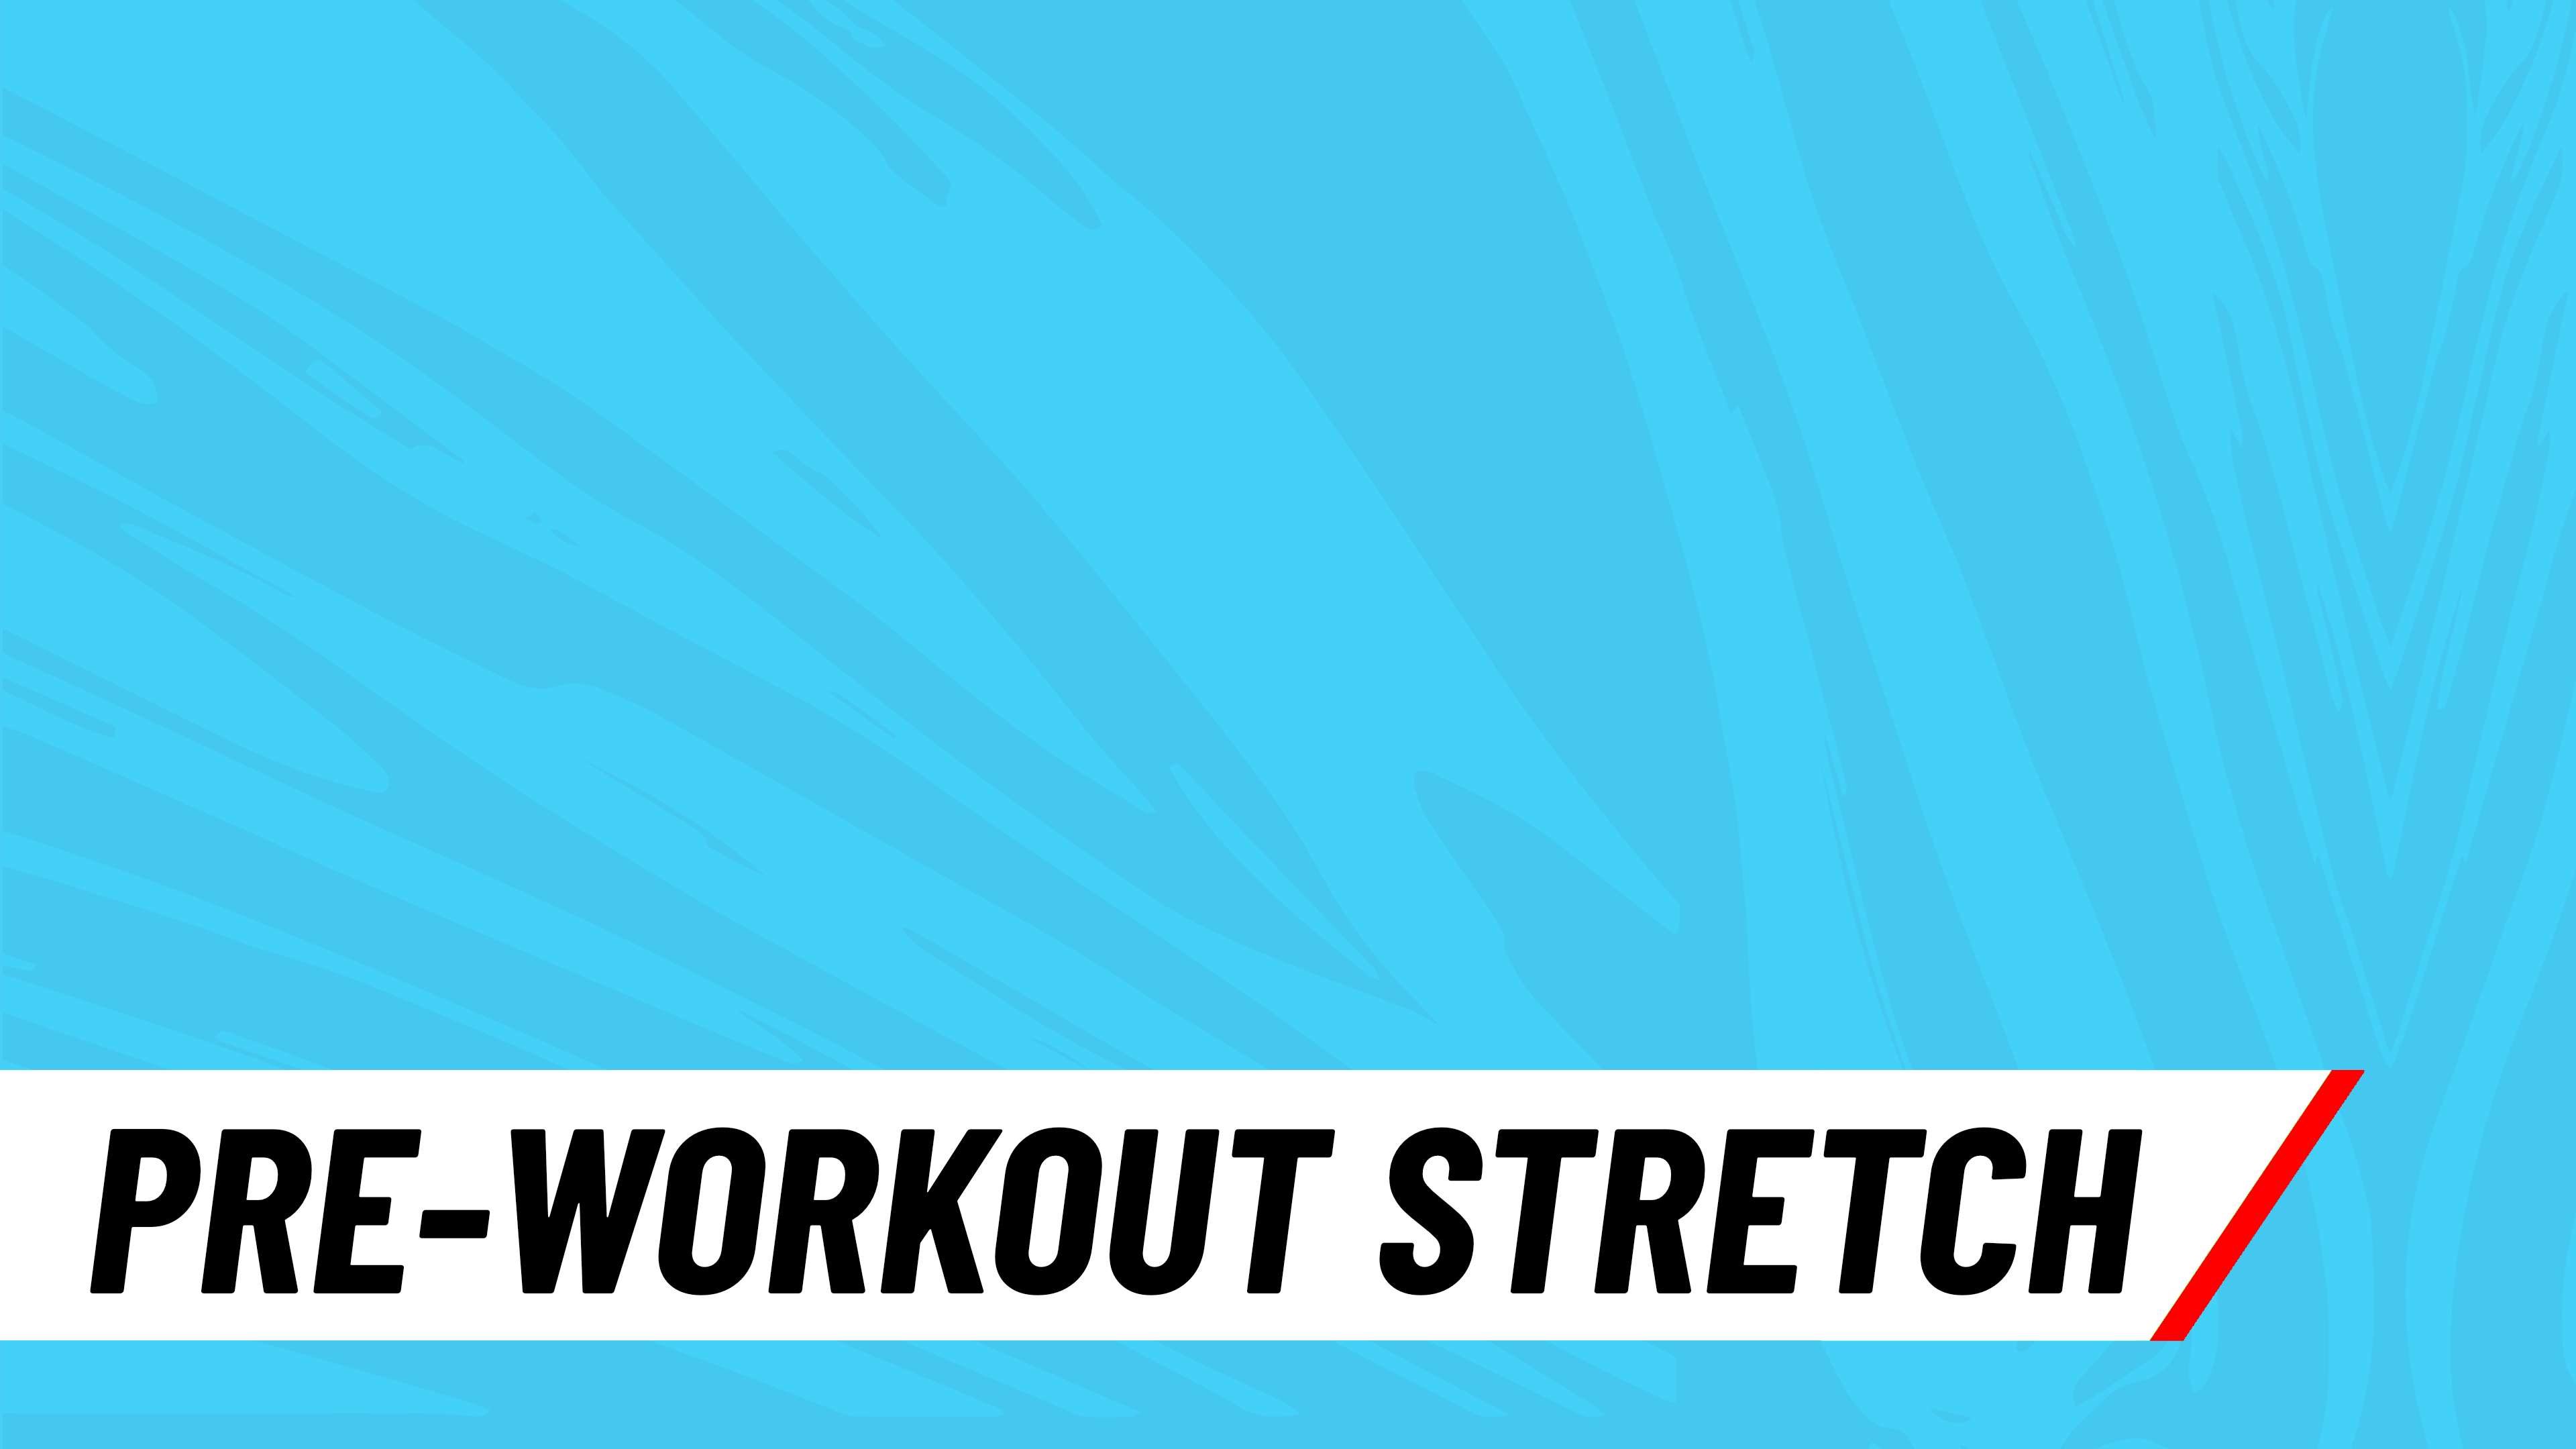 Jump Rope Pre-Workout Stretch